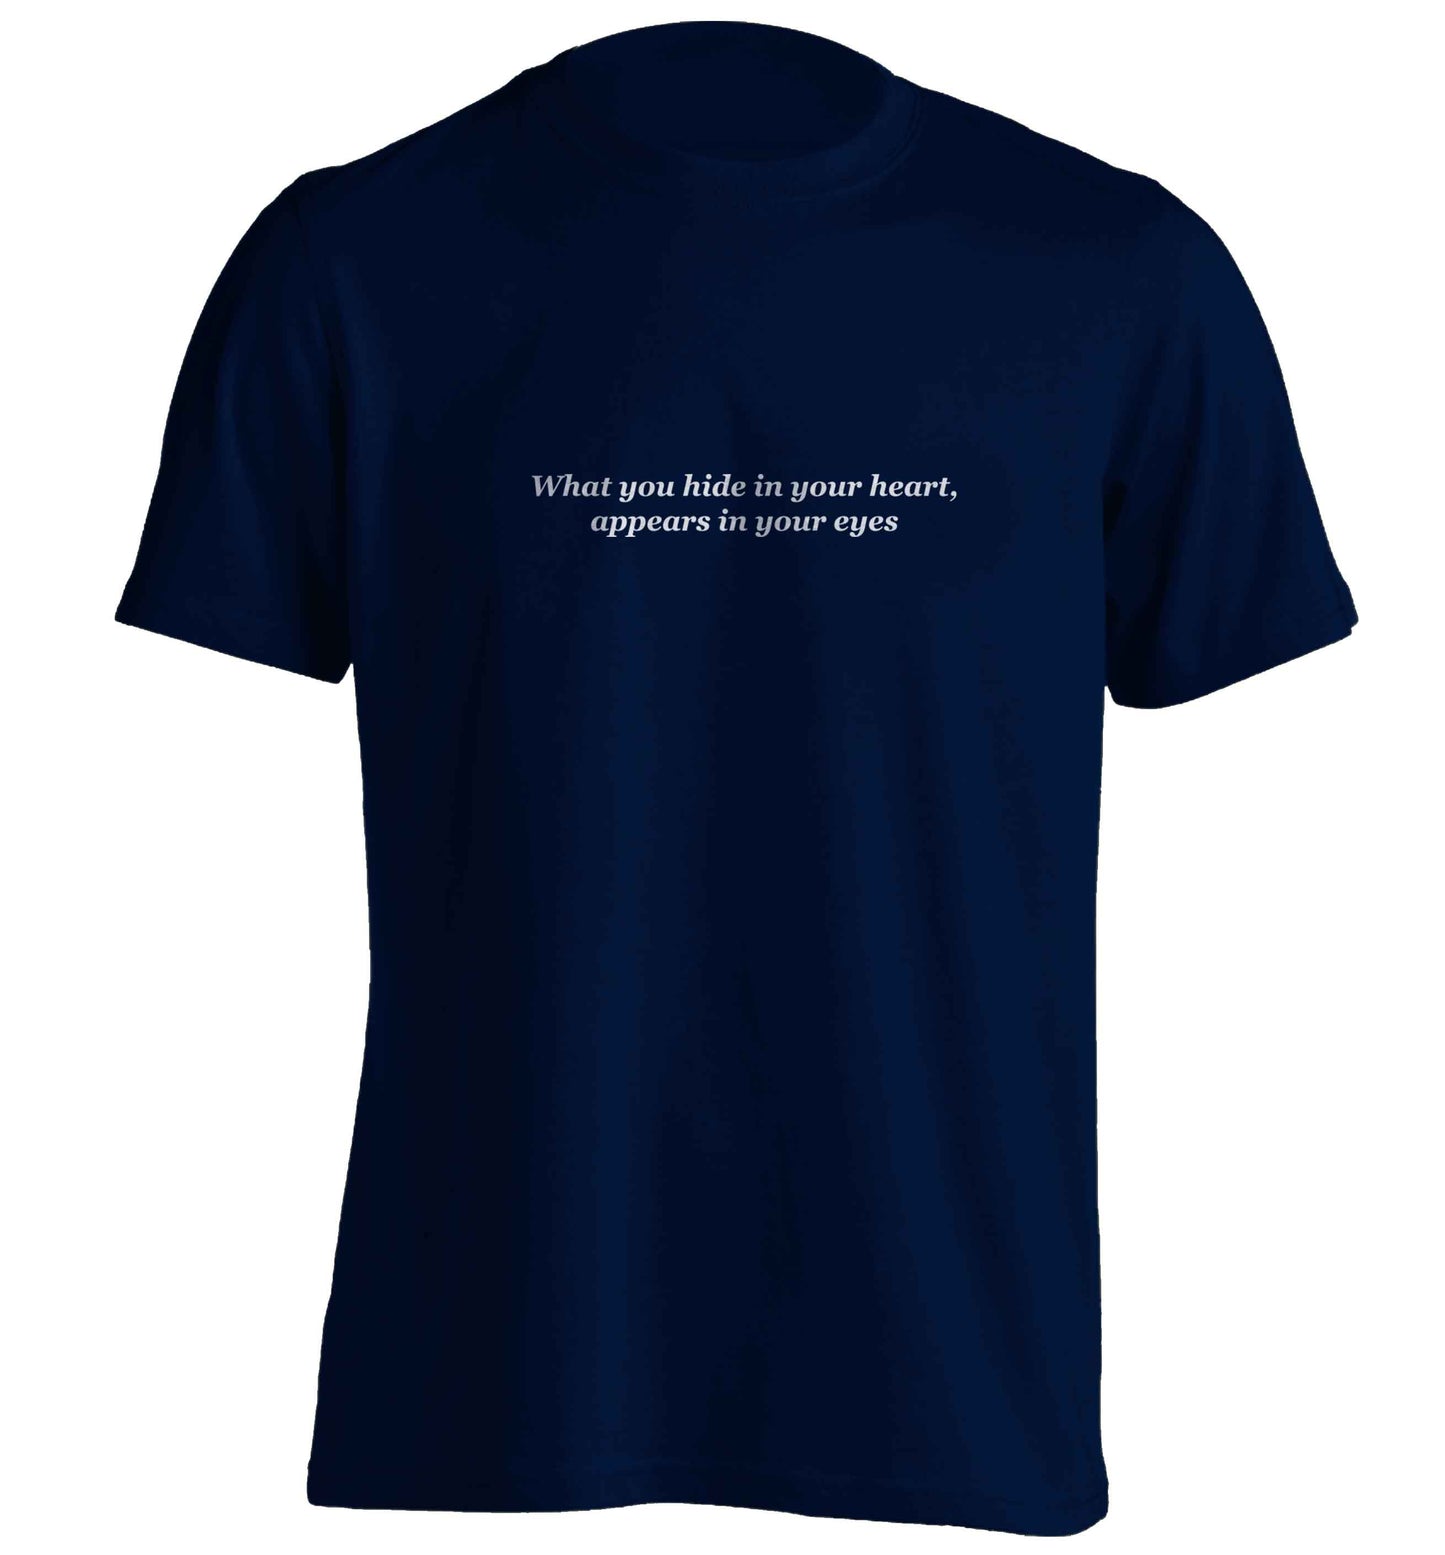 What you hide in your heart, appears in your eyes adults unisex navy Tshirt 2XL